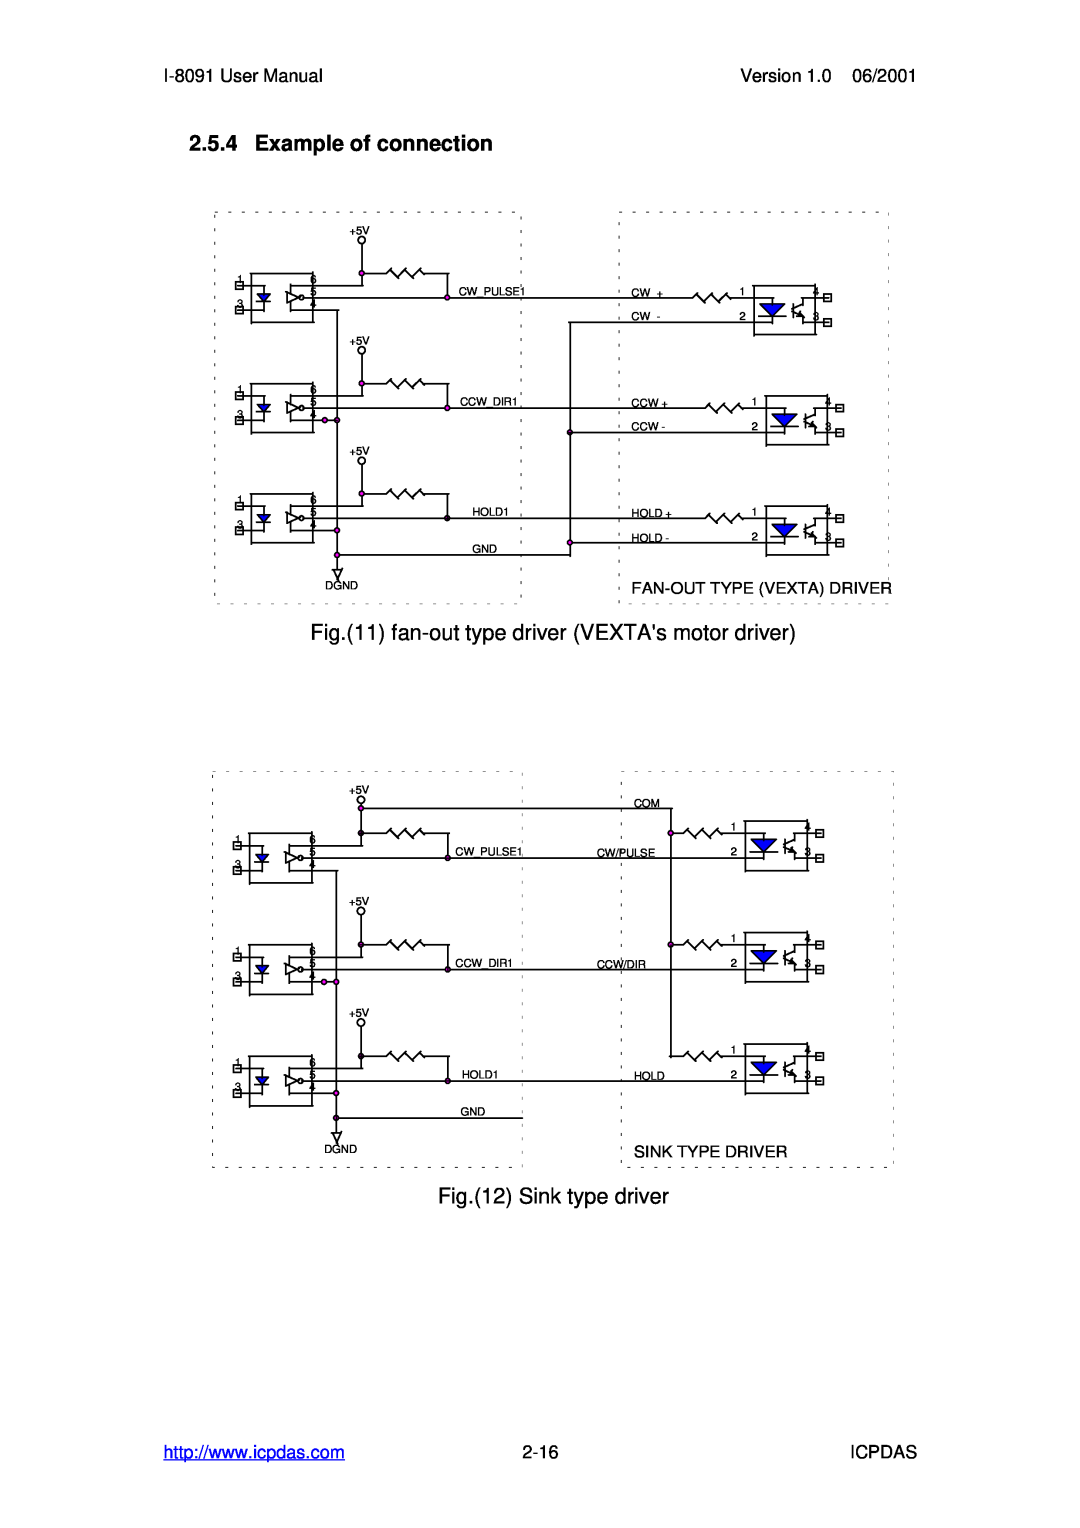 ICP DAS USA I-8091 2-axis stepping/servo Example of connection, I-8091 User Manual, Version 1.0 06/2001, 2-16, Icpdas 